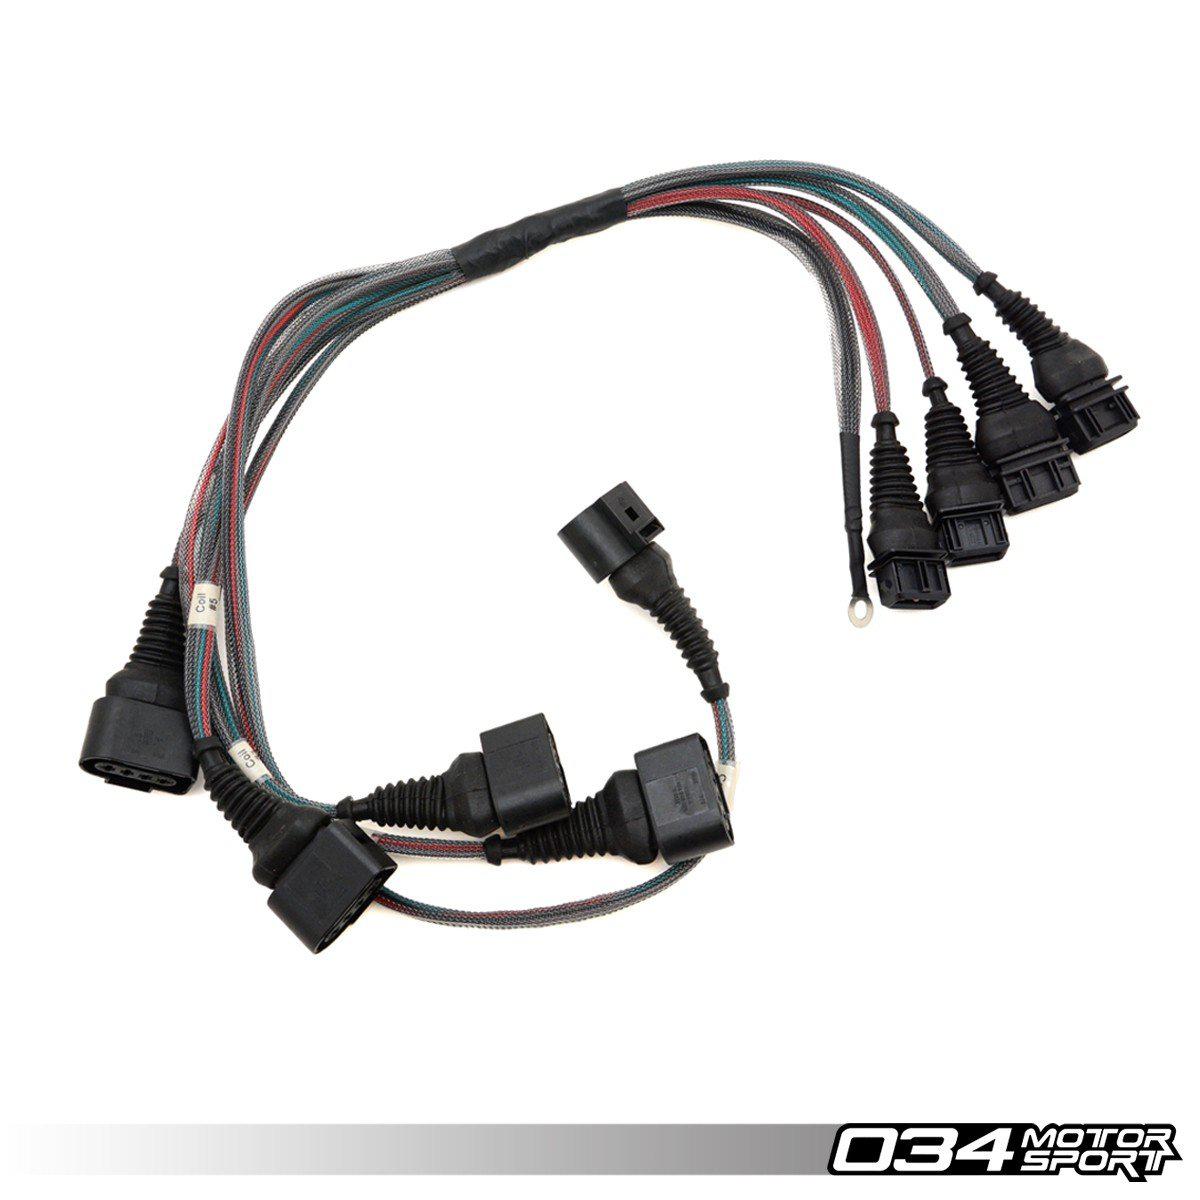 034Motorsport C4 Audi URS4/URS6 & S2/Rs2 I5 20vt Aan/Aby/Adu Coil Pack Update Harness For 2.0TFSI Coils-A Little Tuning Co